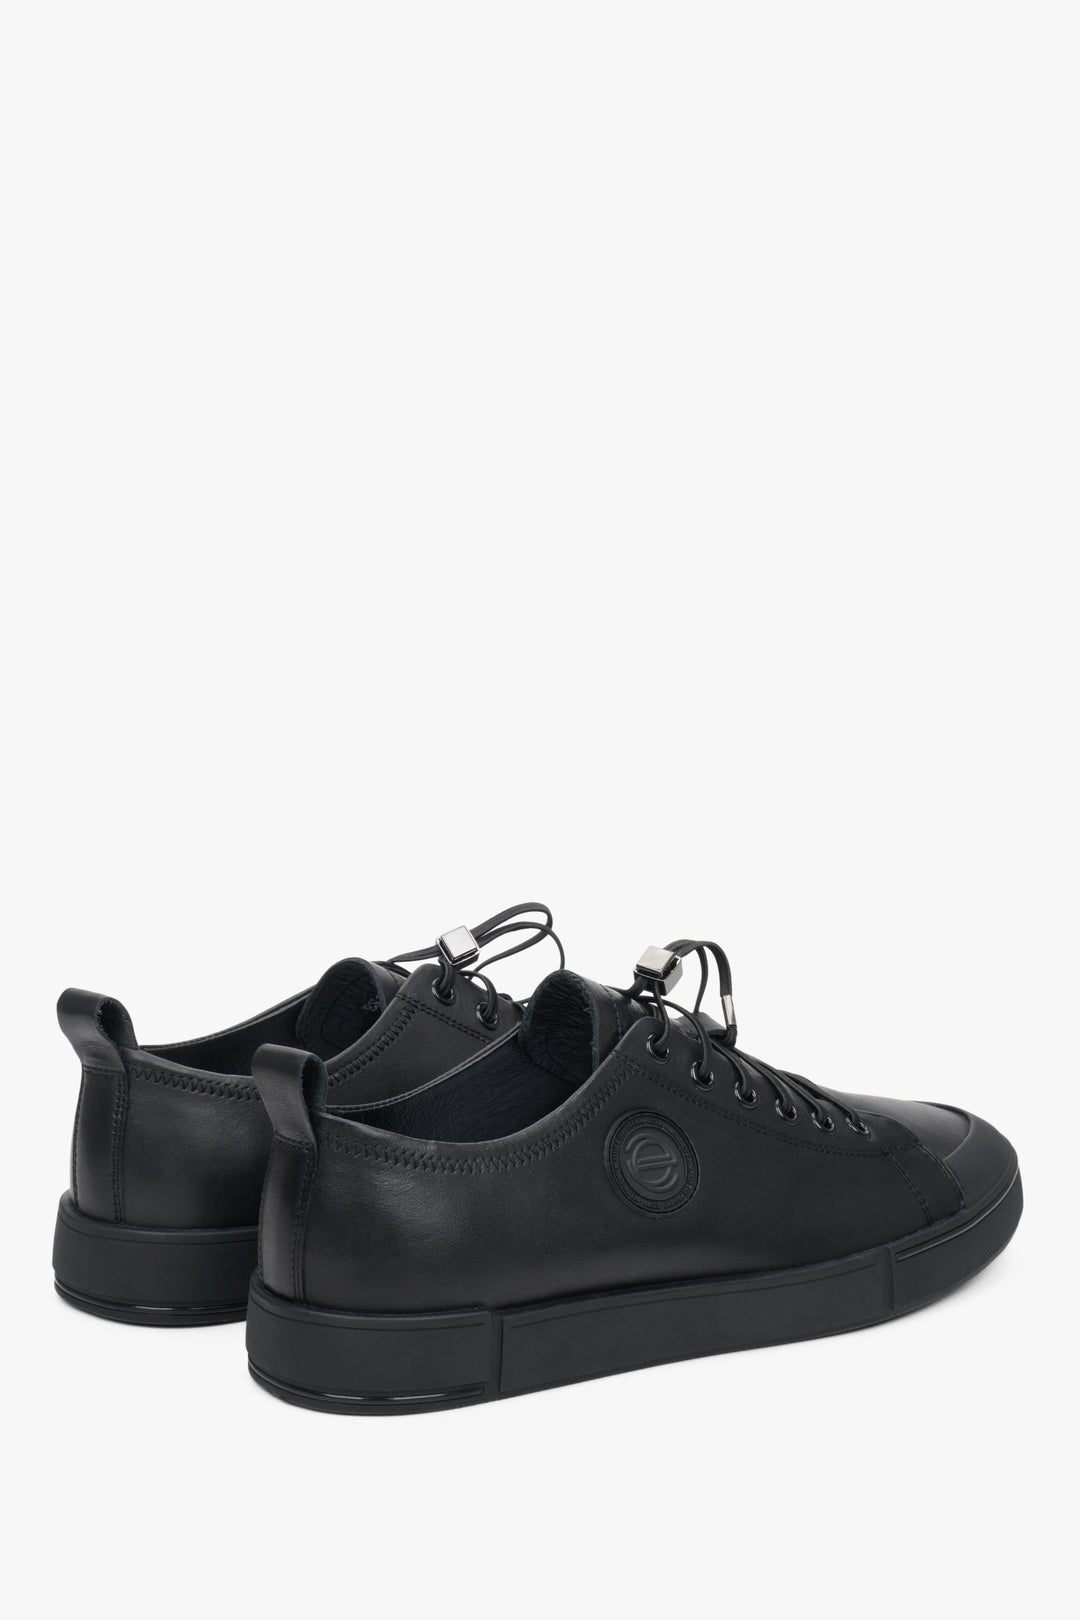 Men's sneakers made of genuine black leather by Estro - presentation of the heel and side seam of the shoe.